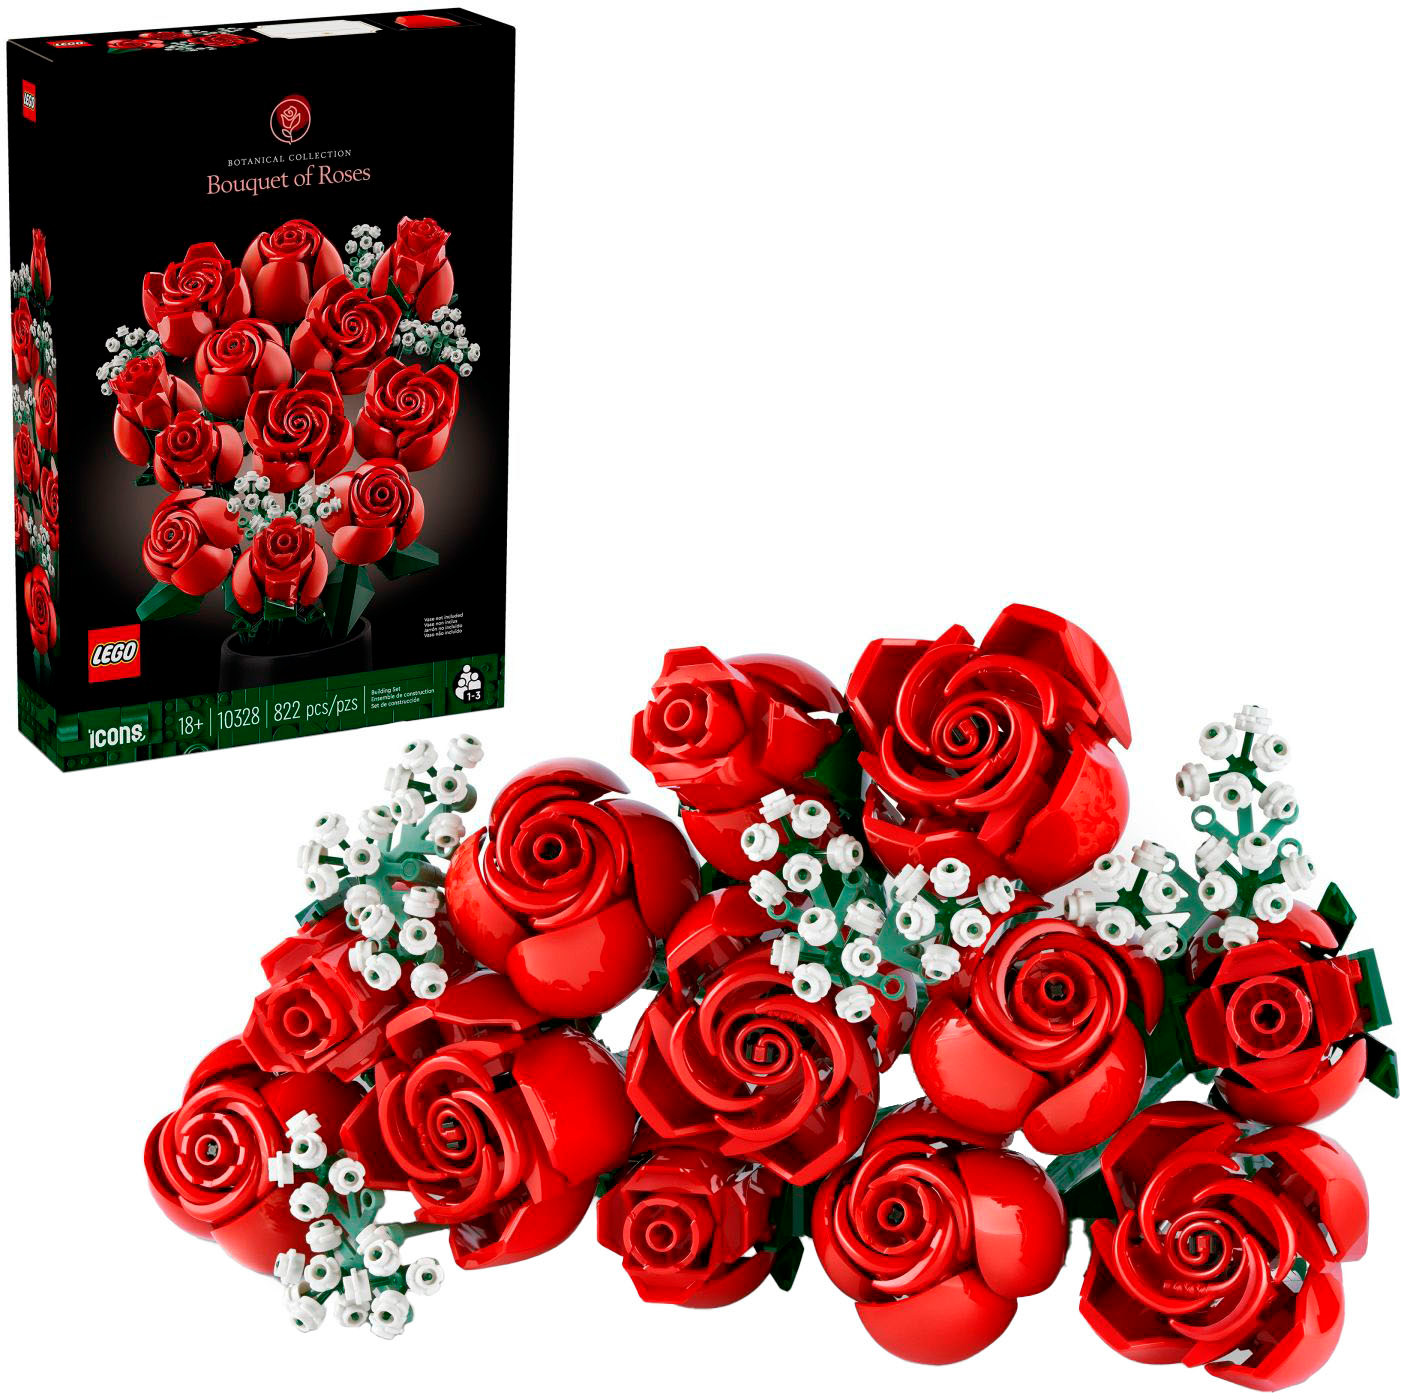 LEGO - Icons Bouquet of Roses Build and Display Set 10328